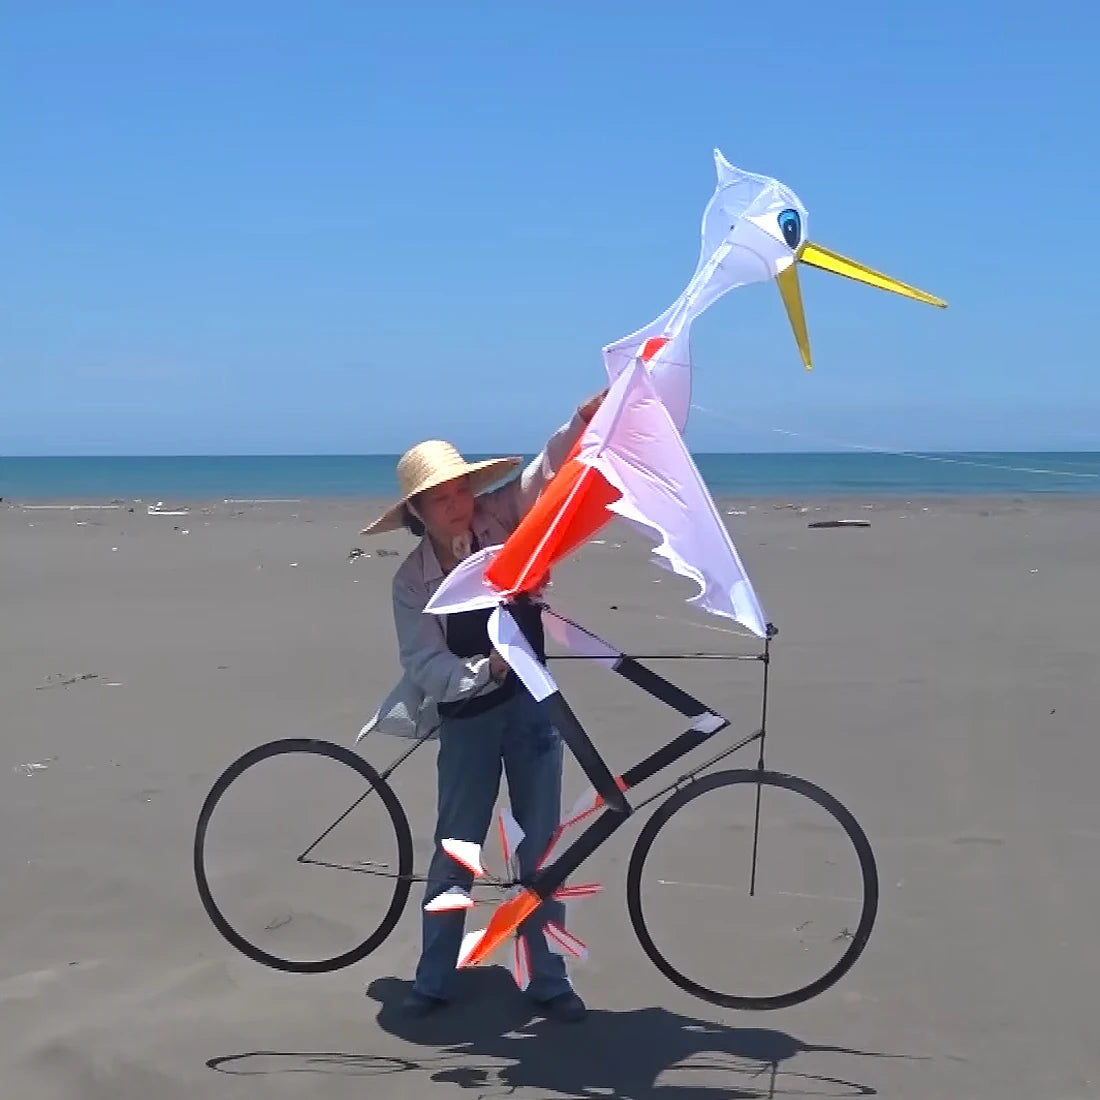 9KM Dynamic Bicycle Kite 1.2m*0.8m Line Laundry Single Line Show Kite with Pedaling Action - ToylandEU